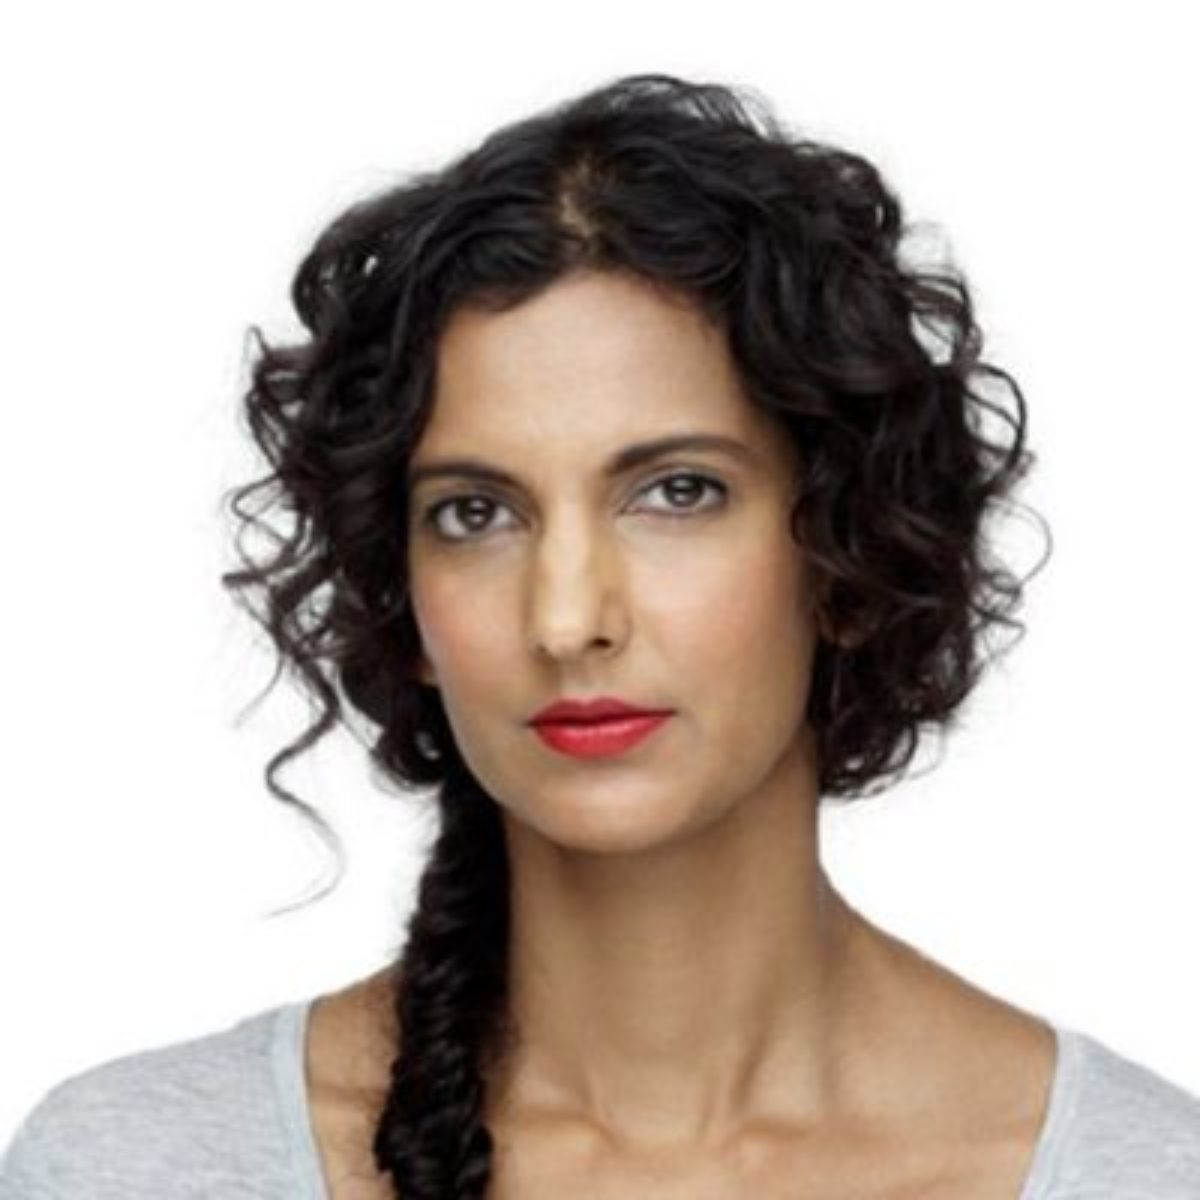 Who Is Poorna Jagannathan Child And Son? Her Husband, Parents, Family & Indian Ethnicity Explained